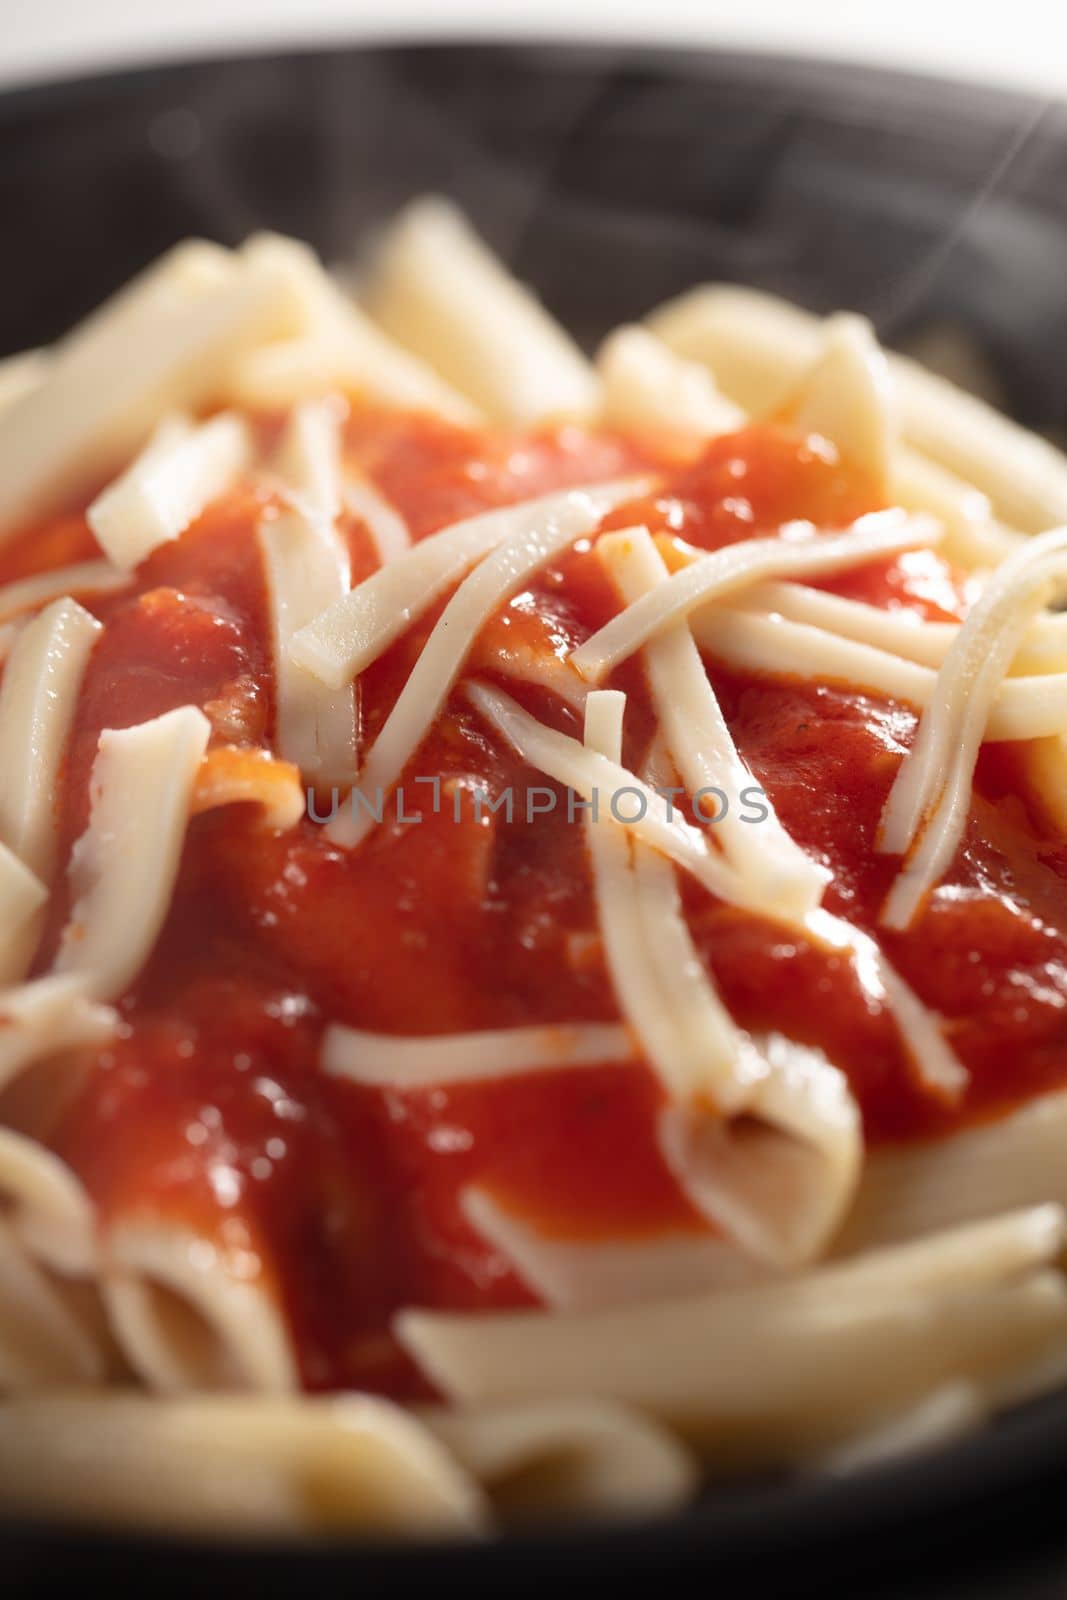 Pasta with Napoliten sauce - Penne. High quality photo